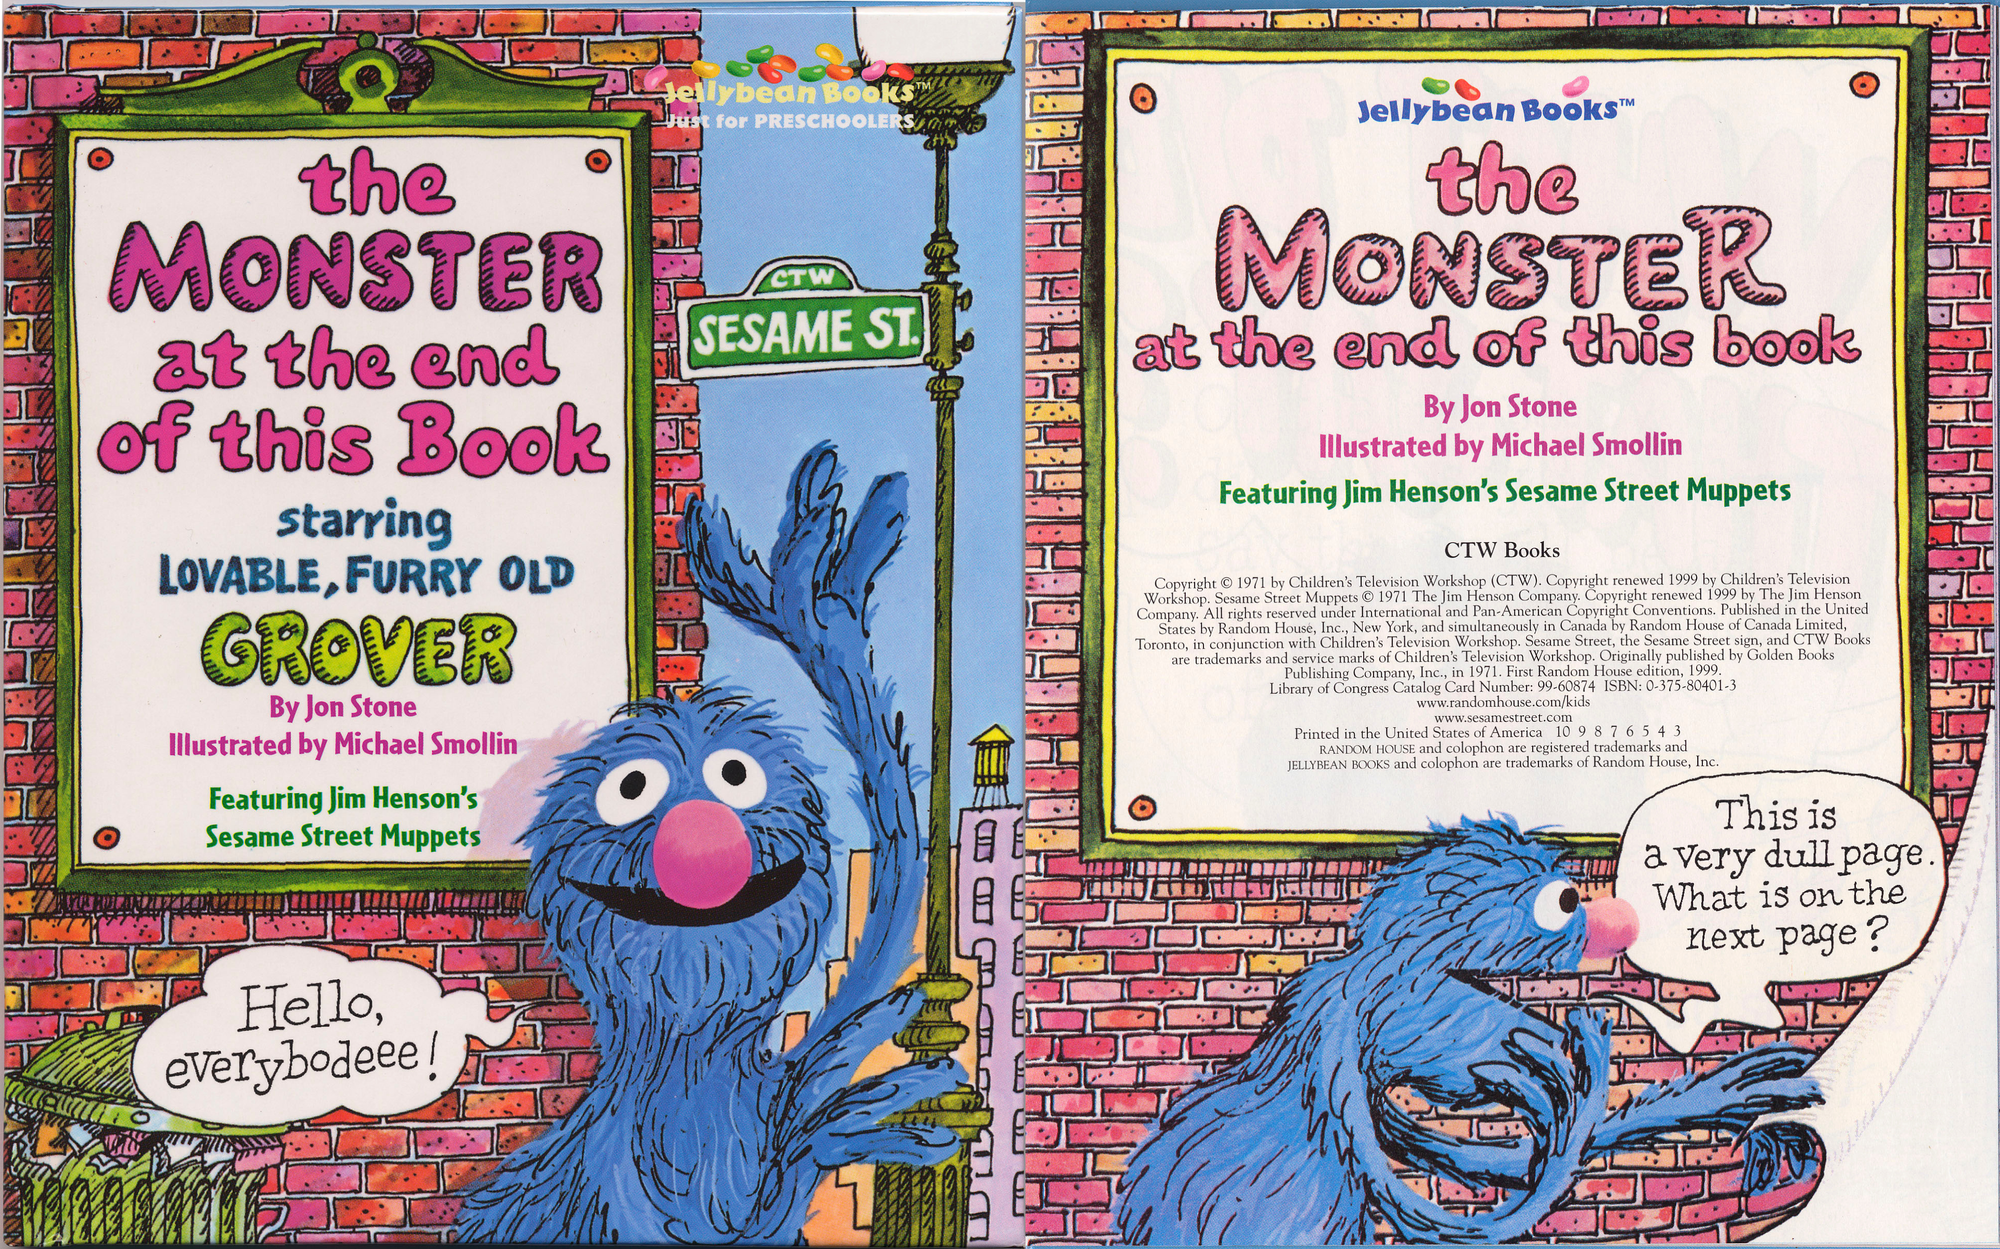 The cover and inner title page The Monster at The End of This Book.